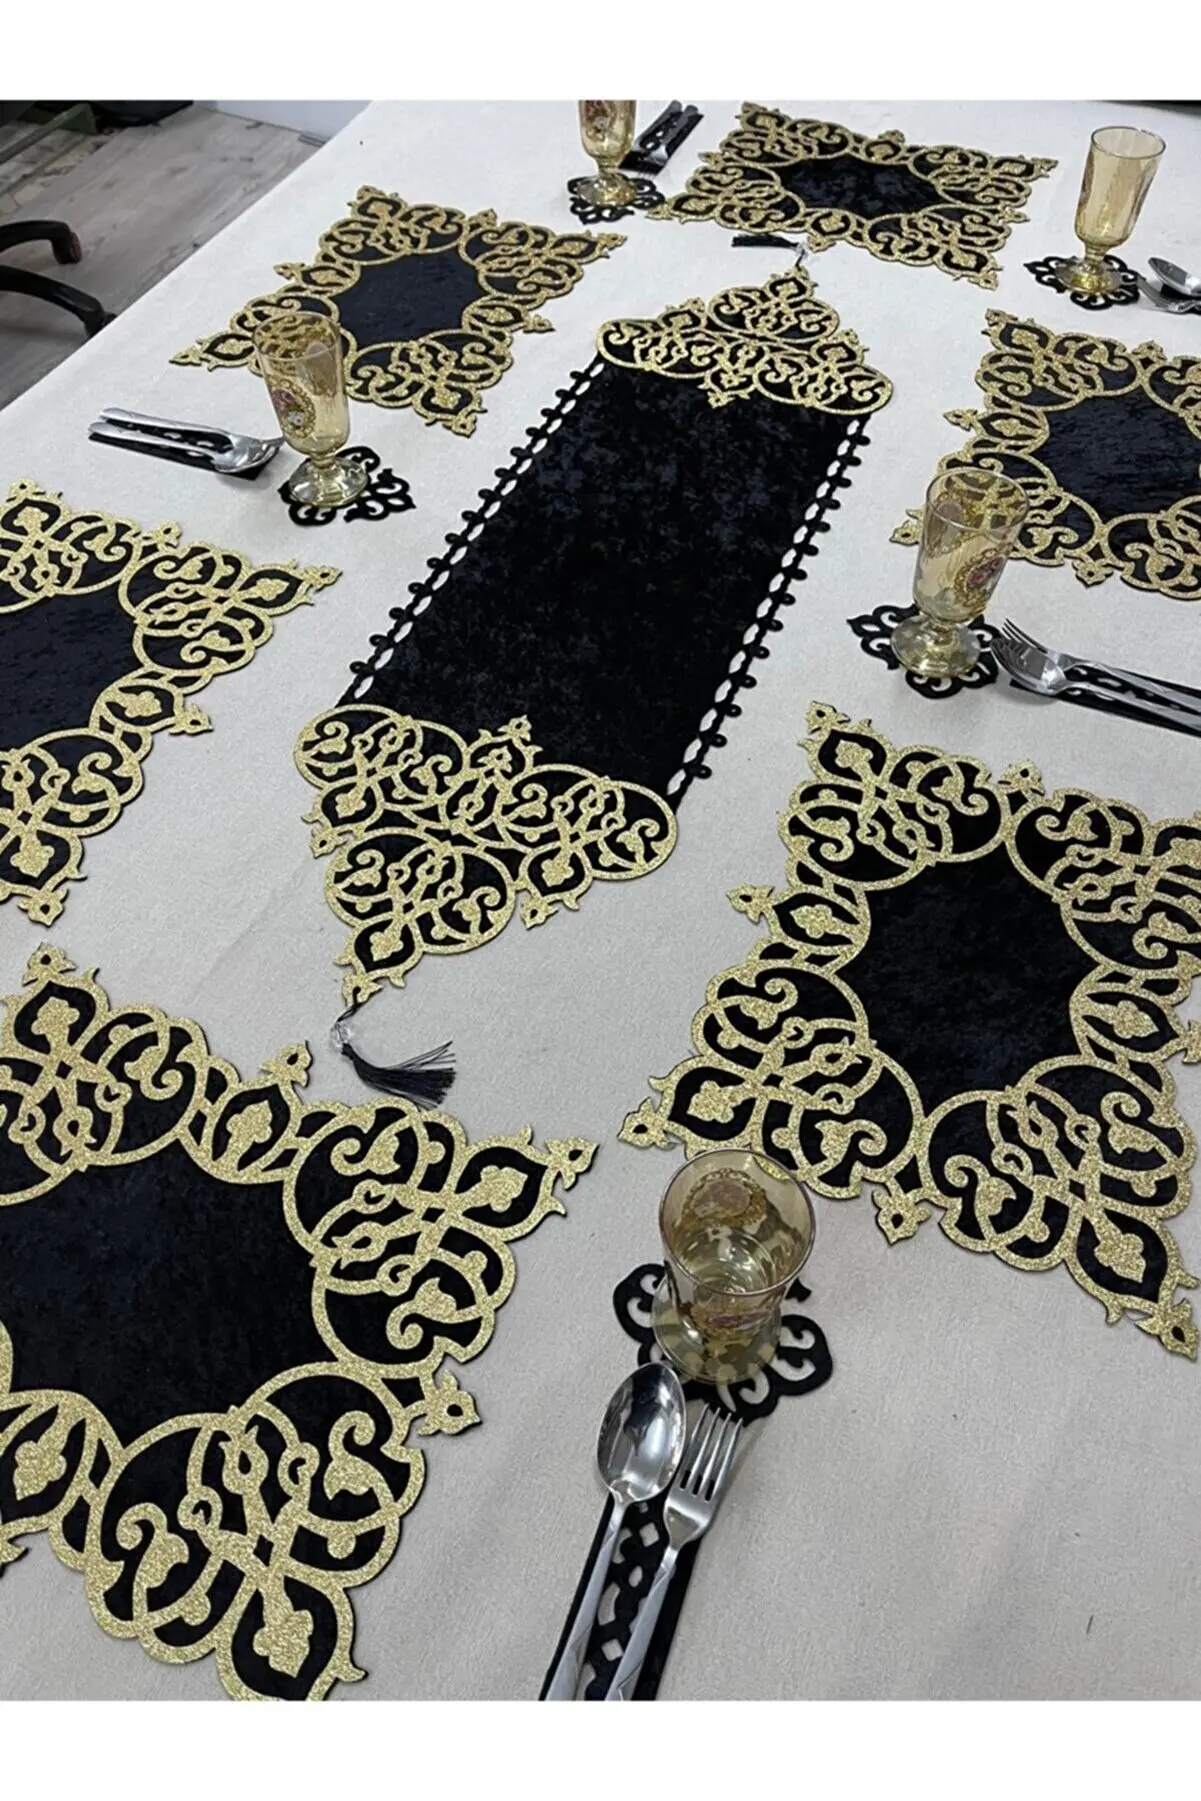 

Bright Velvet Faux Leather Table Runner Table Cloth Erase Meal Presentation Kit 6 Personality Gold Silver Black Model Wedding Decoration Foam Runner Wedding Table Decoration